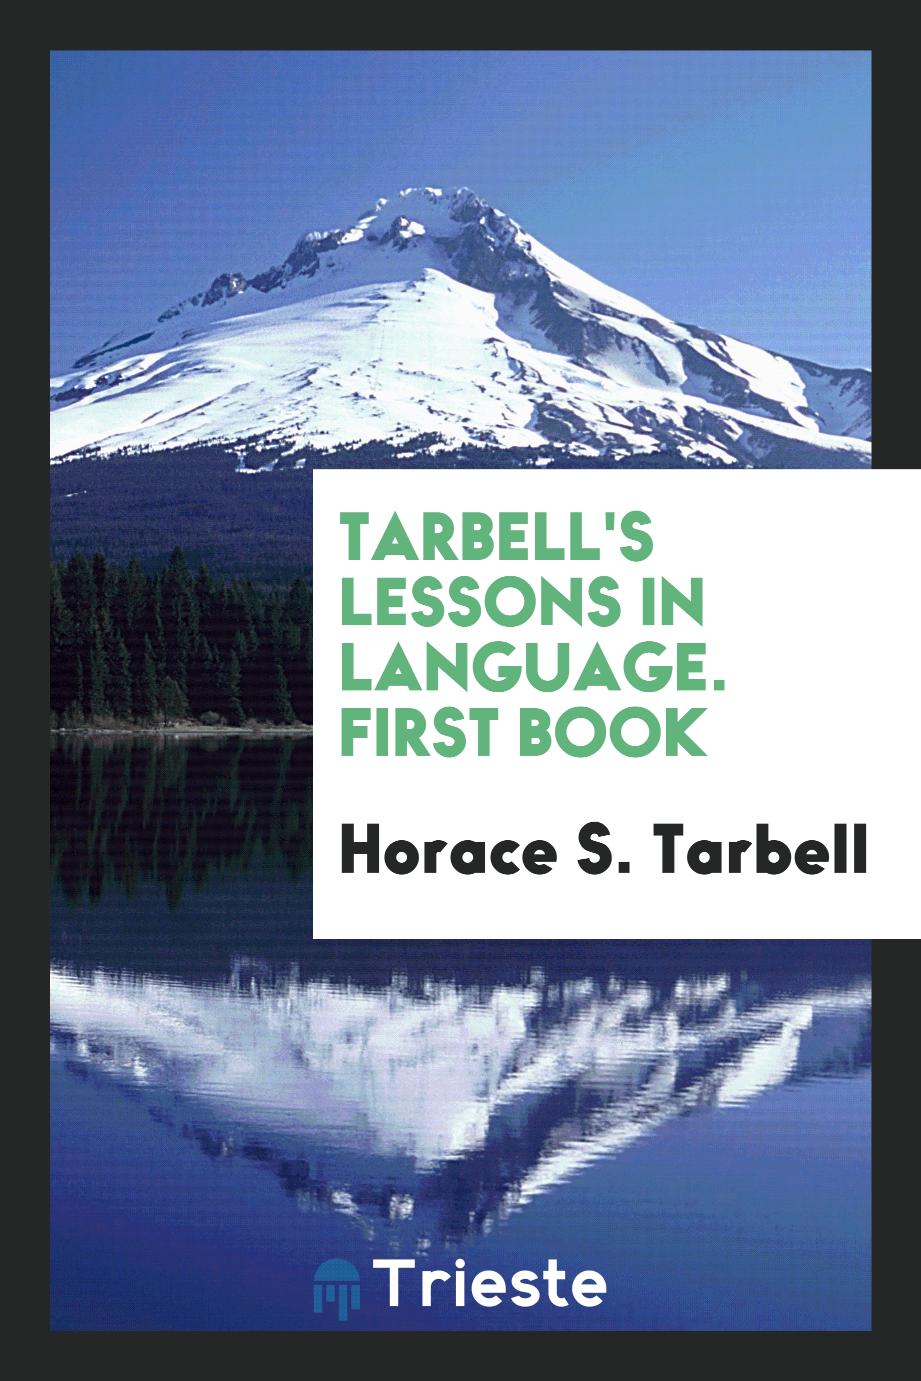 Tarbell's Lessons in Language. First Book